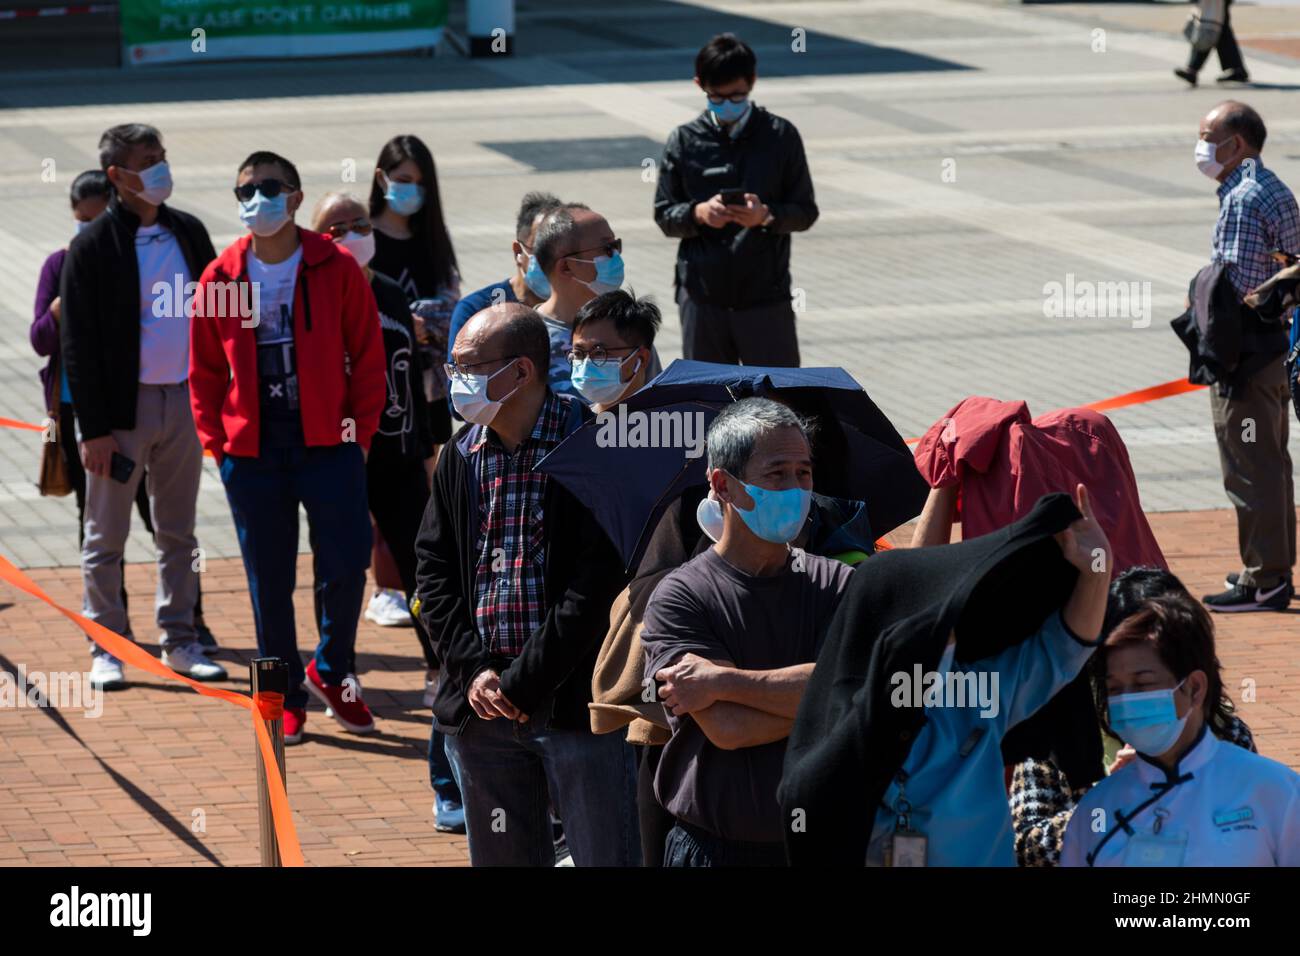 Hong Kong, China. 11th Feb, 2022. People queue at a temporary COVID test centre in Edinburgh Place in Central Hong Kong. Some try to take shelter from the sun under their coats. Credit: Marc R. Fernandes /Alamy Live News Stock Photo